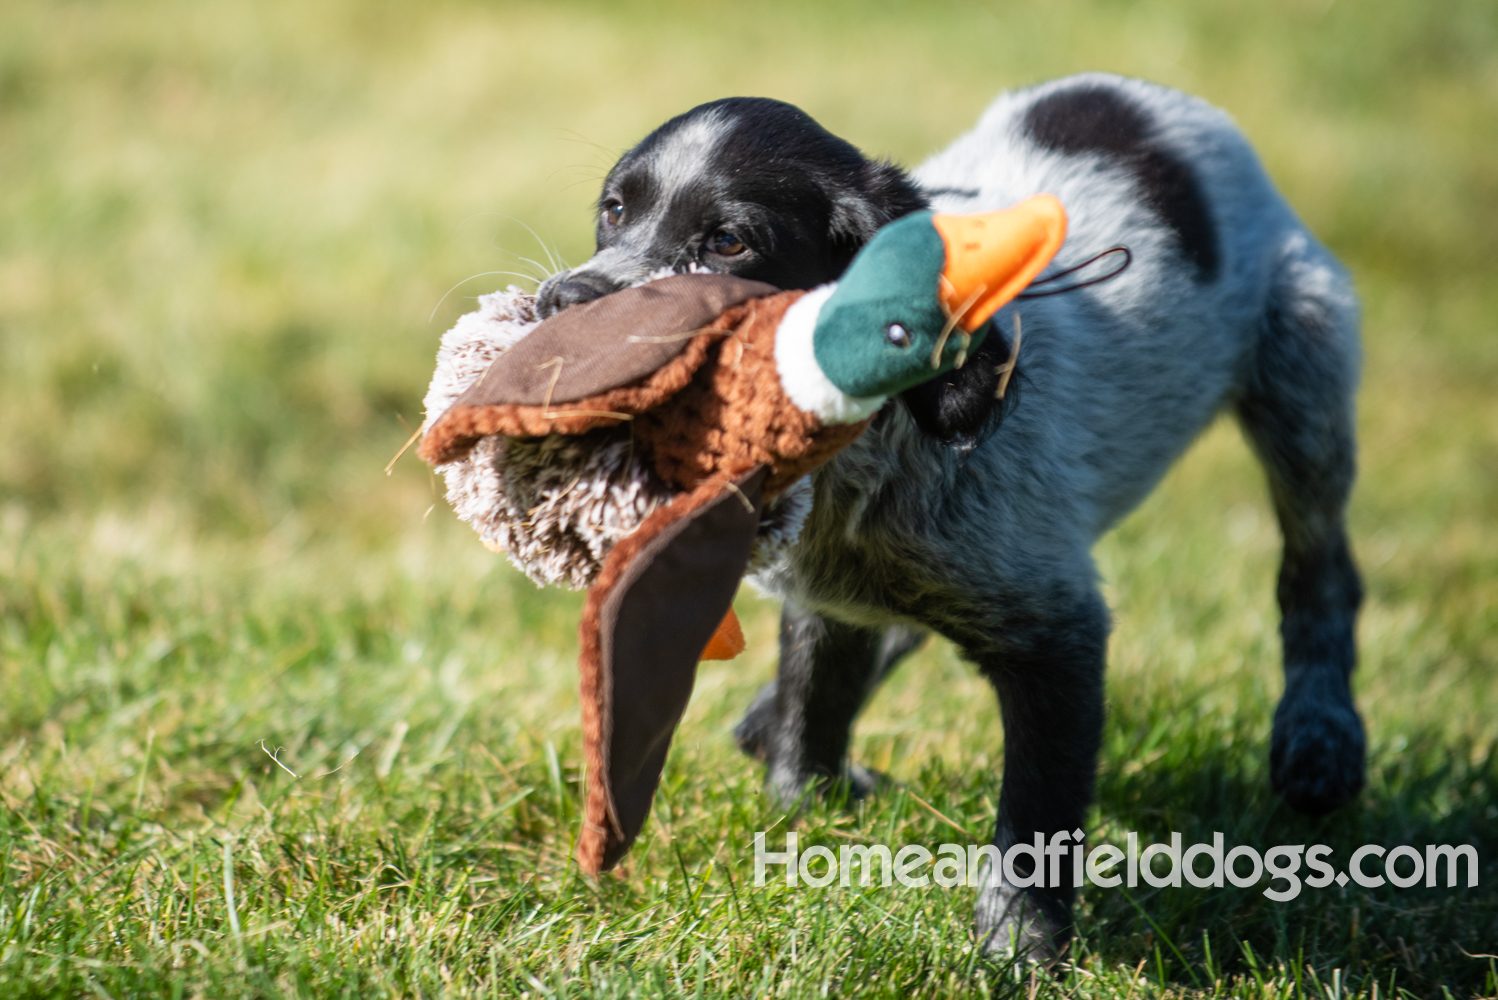 Photoshoot with a man and a black roan french brittany puppy